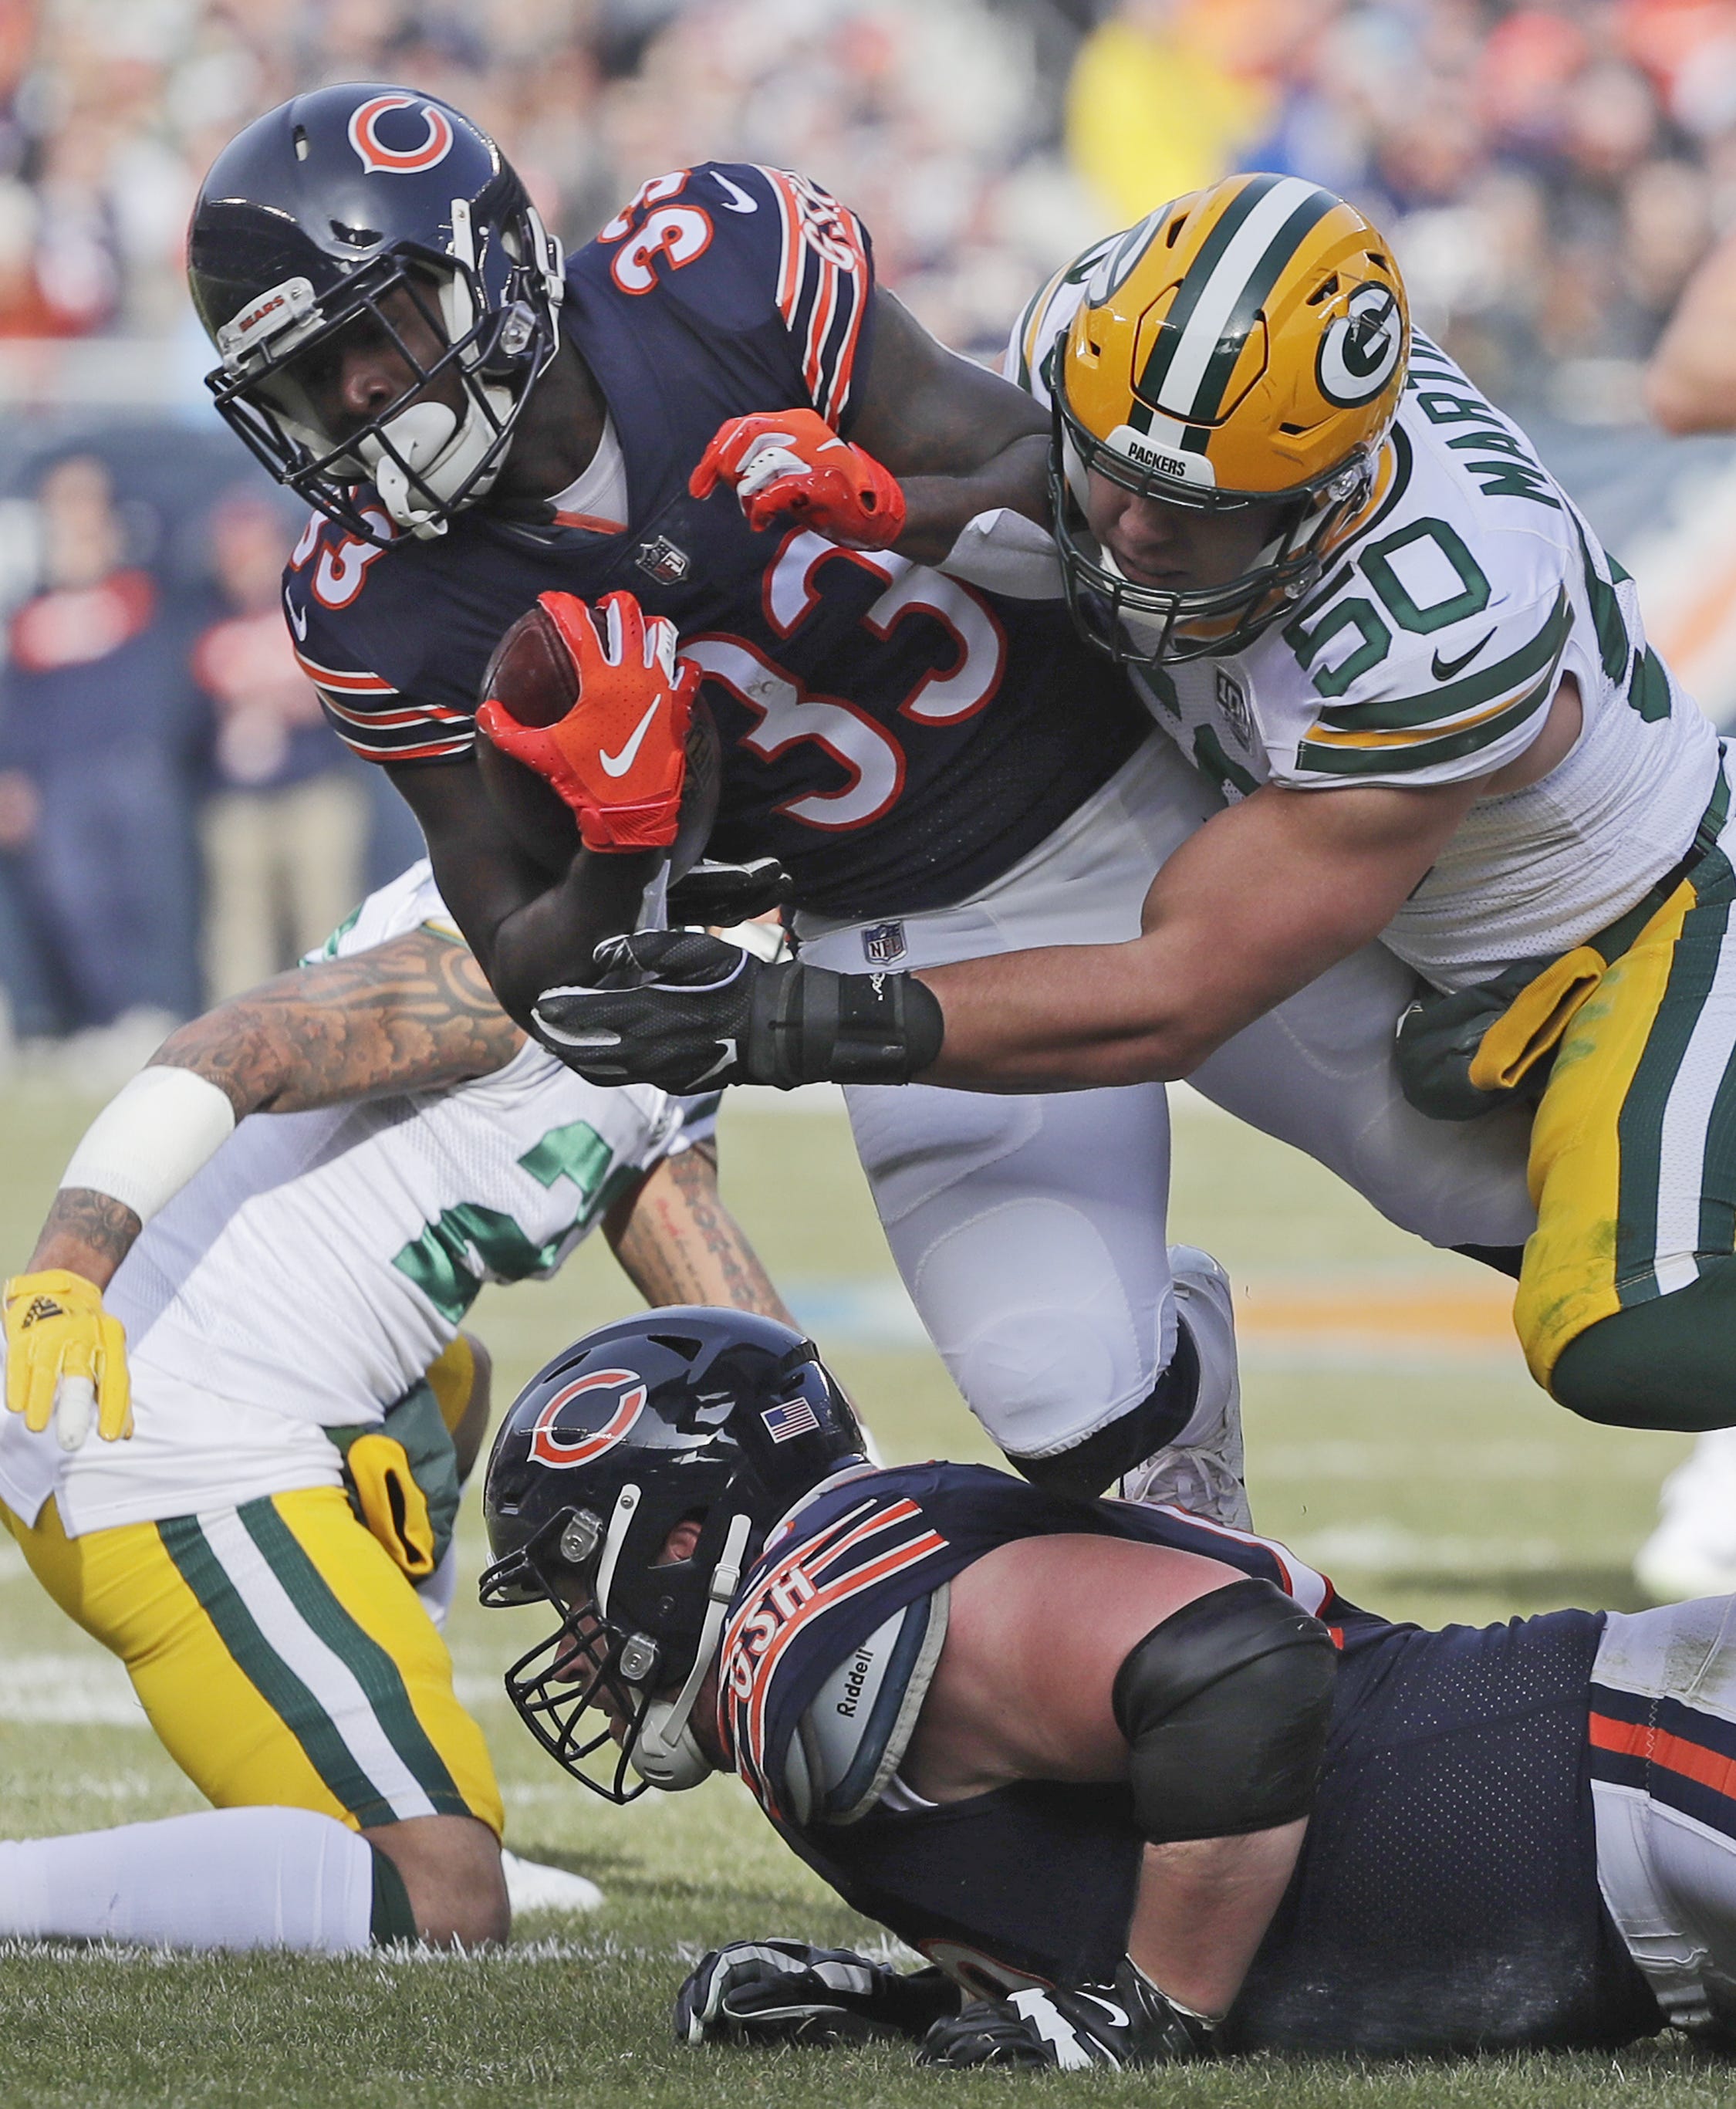 Green Bay Packers inside linebacker Blake Martinez (50) tackles Chicago Bears running back Taquan Mizzell (33) in the first quarter at Soldier Field on Sunday, December 16, 2018 in Chicago, Illinois.
Adam Wesley/USA TODAY NETWORK-Wis